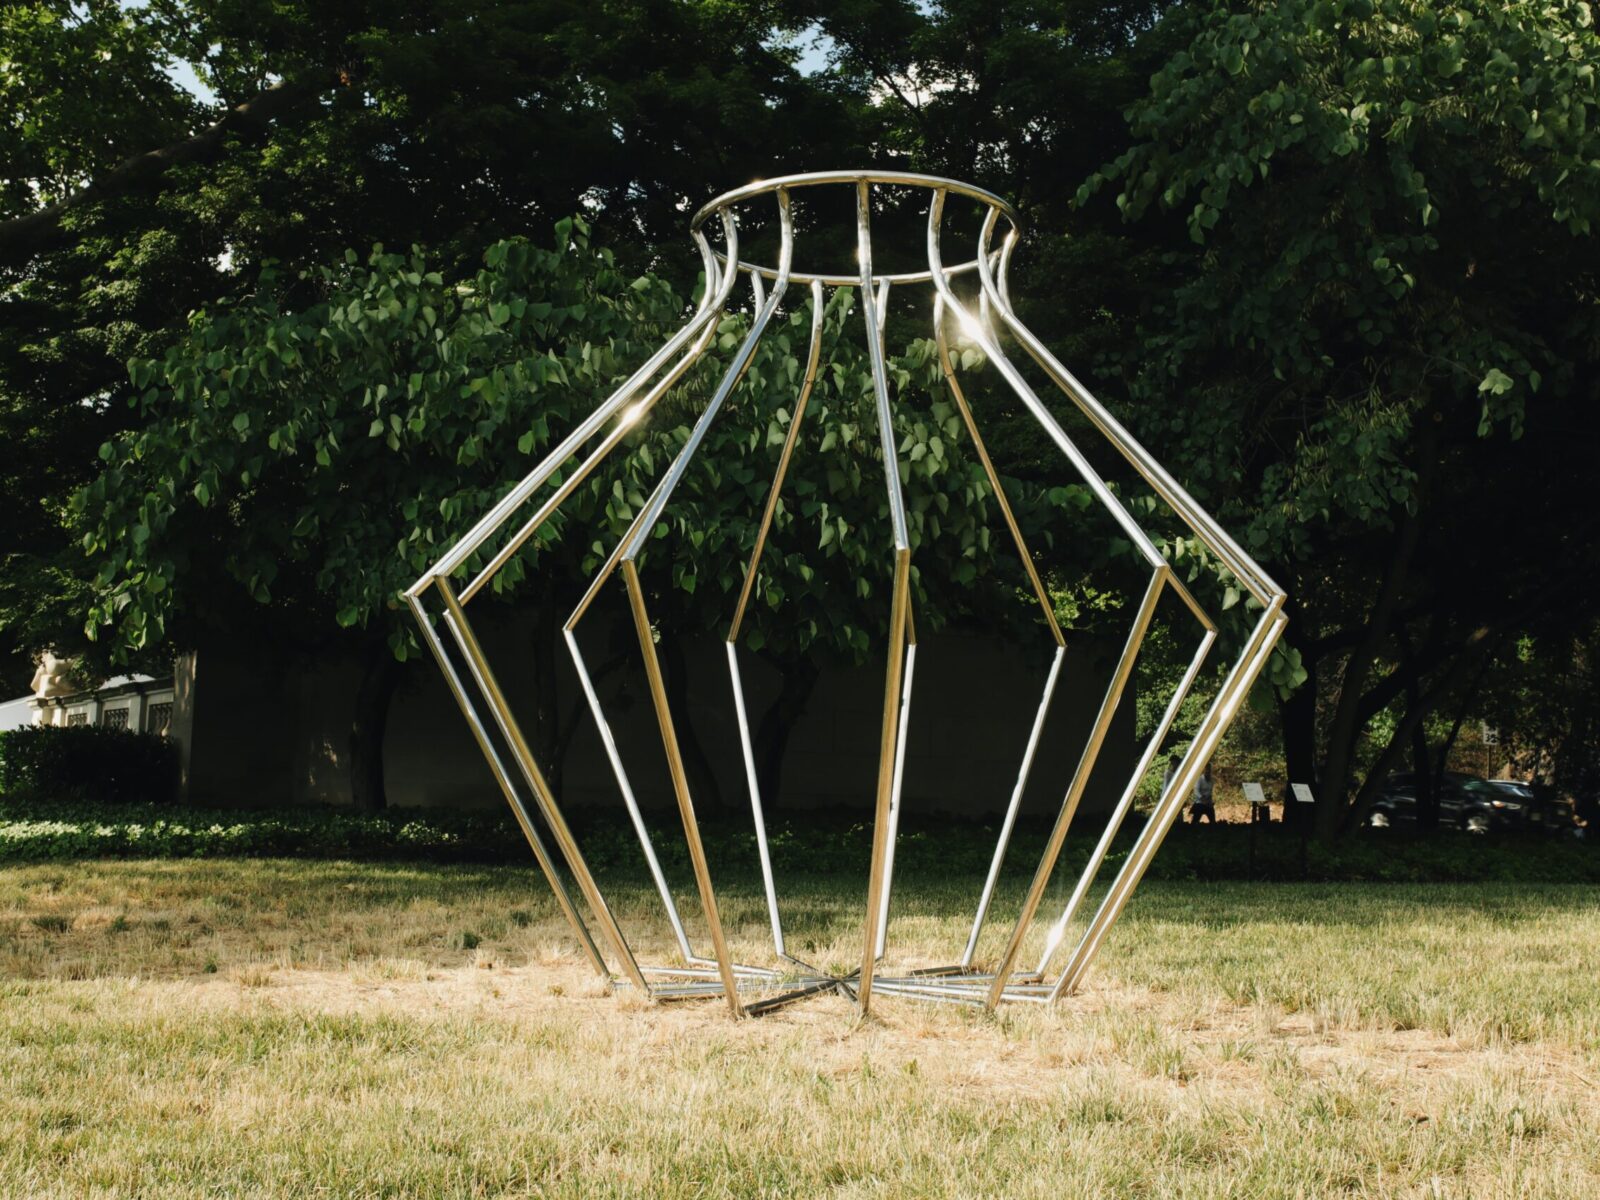 One of ten large-scale open metal vessel sculptures by Maren Hassinger, installed at the Ellen Phillips Samuel Memorial in Philadelphia, along Kelly Drive and the Schuylkill River. Inspired by ancient iconic vessel archetypes, the abstract sculptures suggest three-dimensional line drawings that vividly connect art with nature.